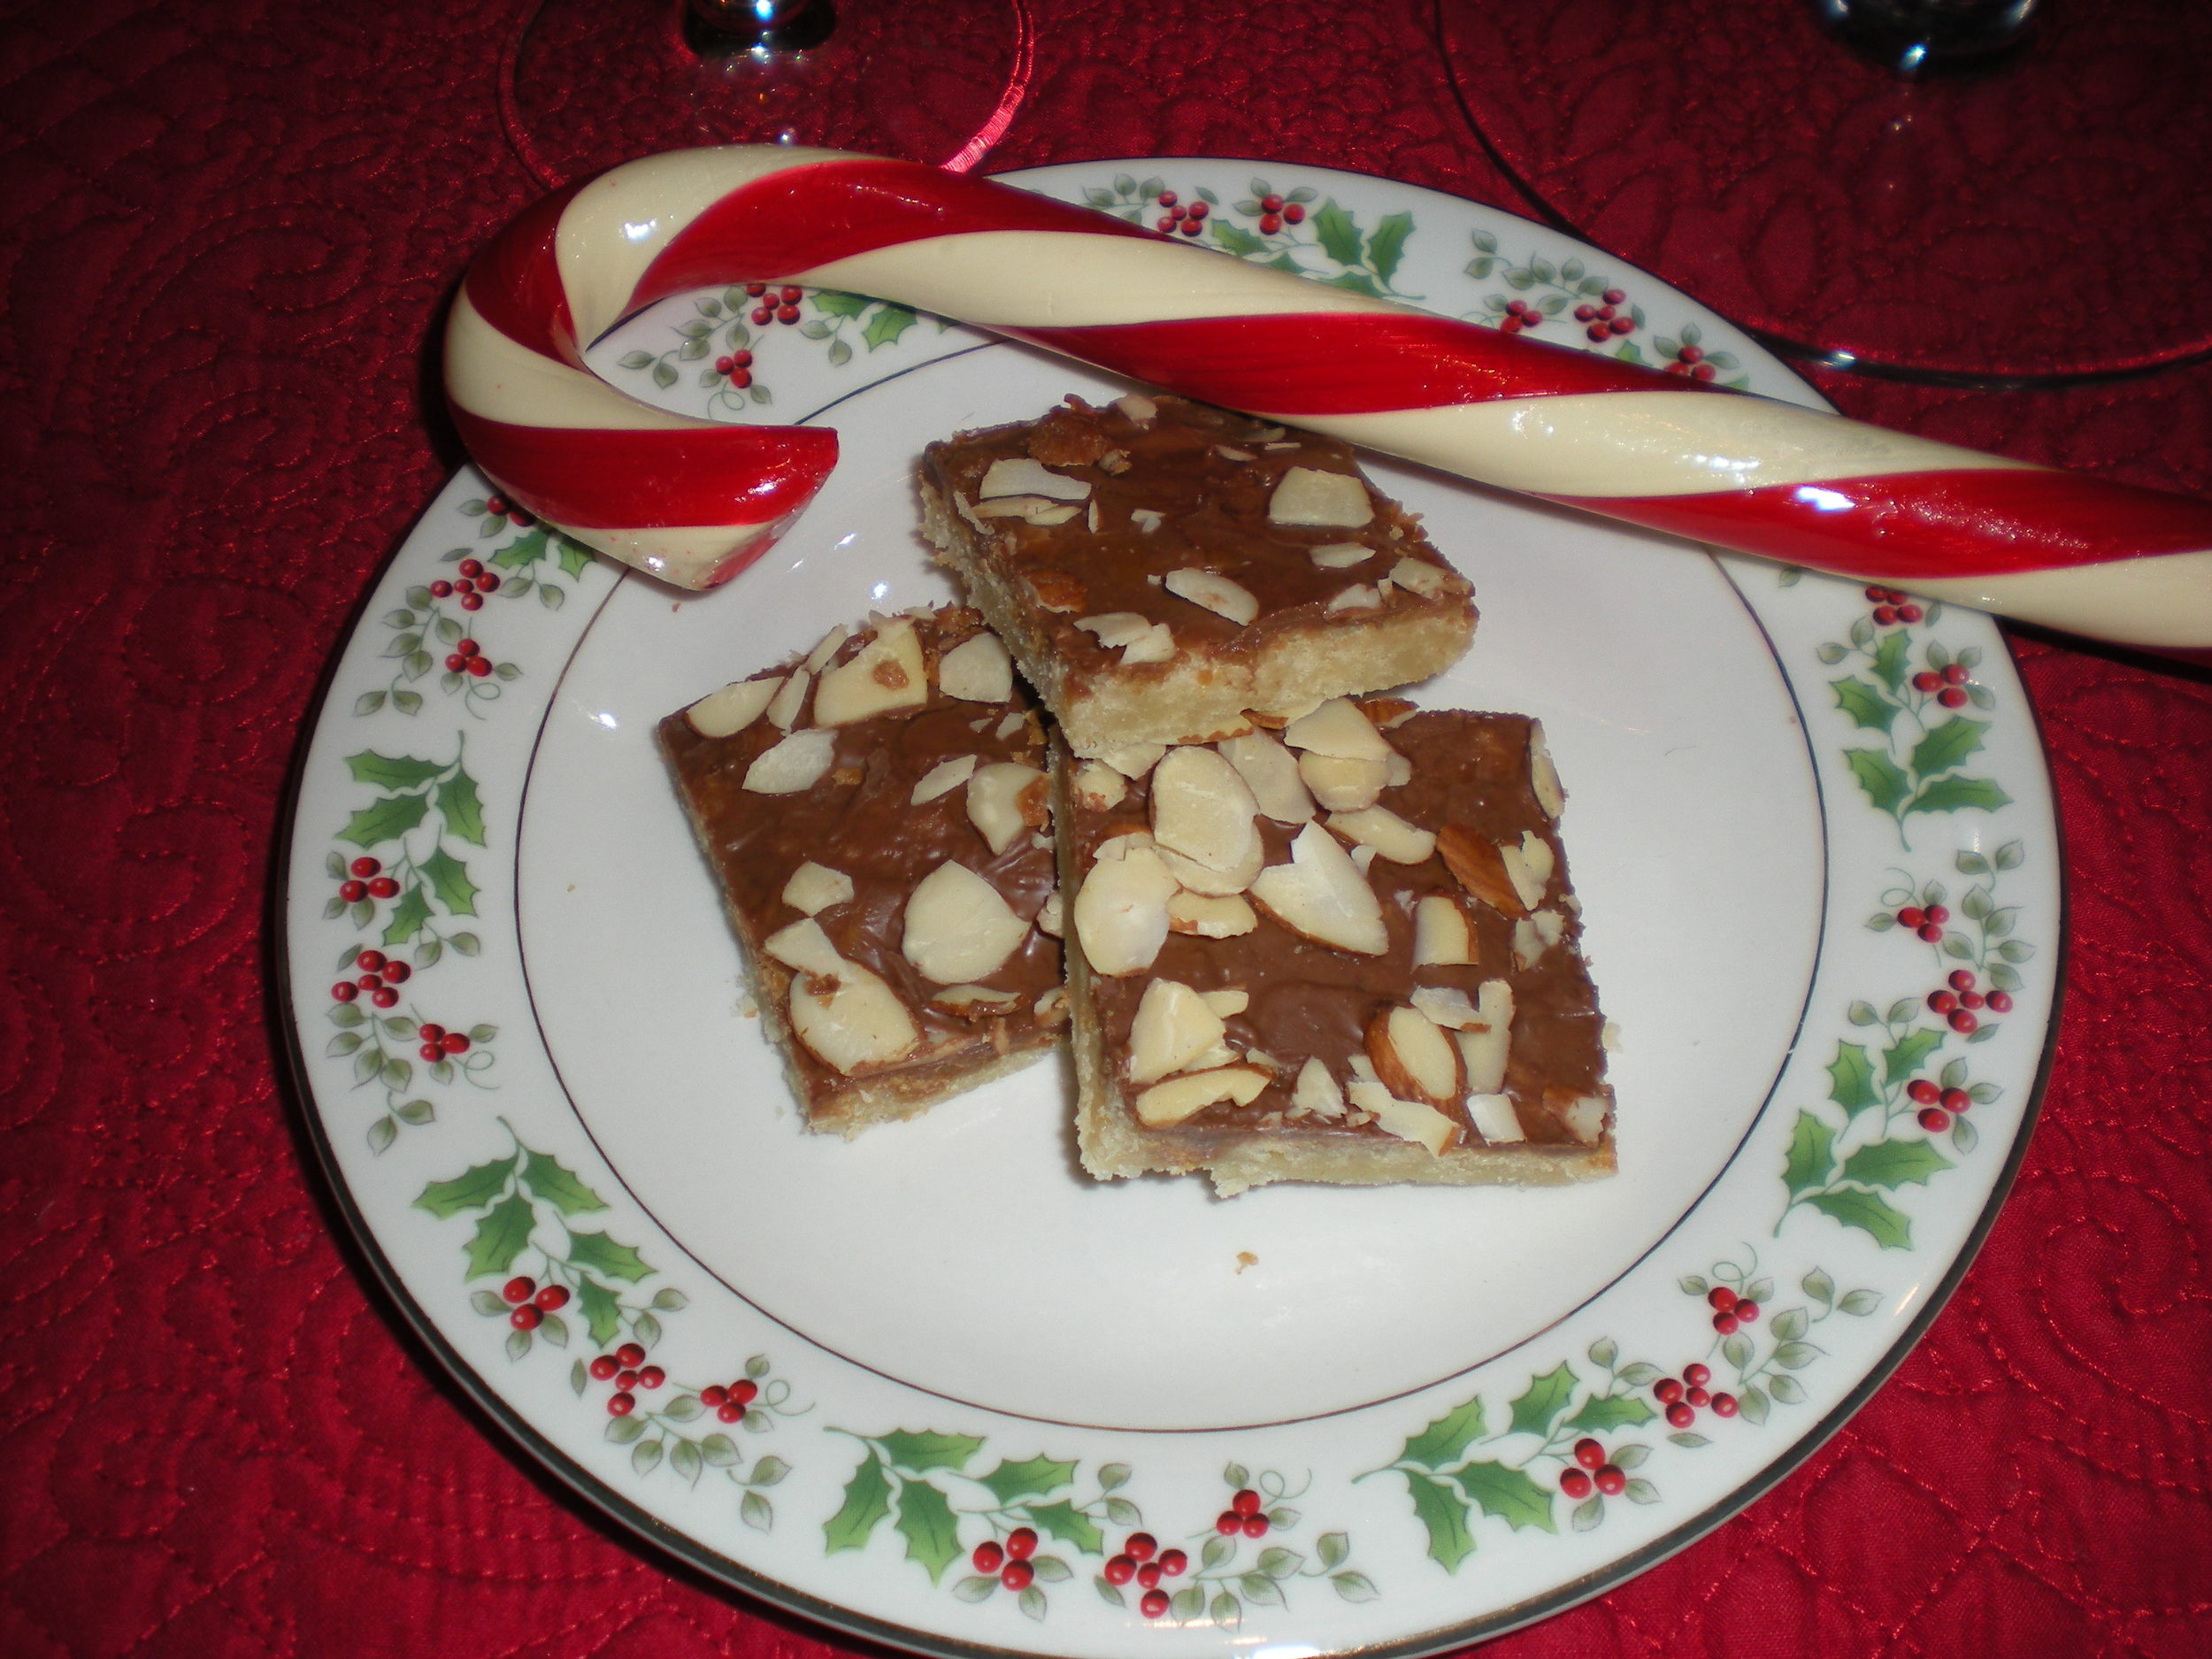 Almond Toffee Bars